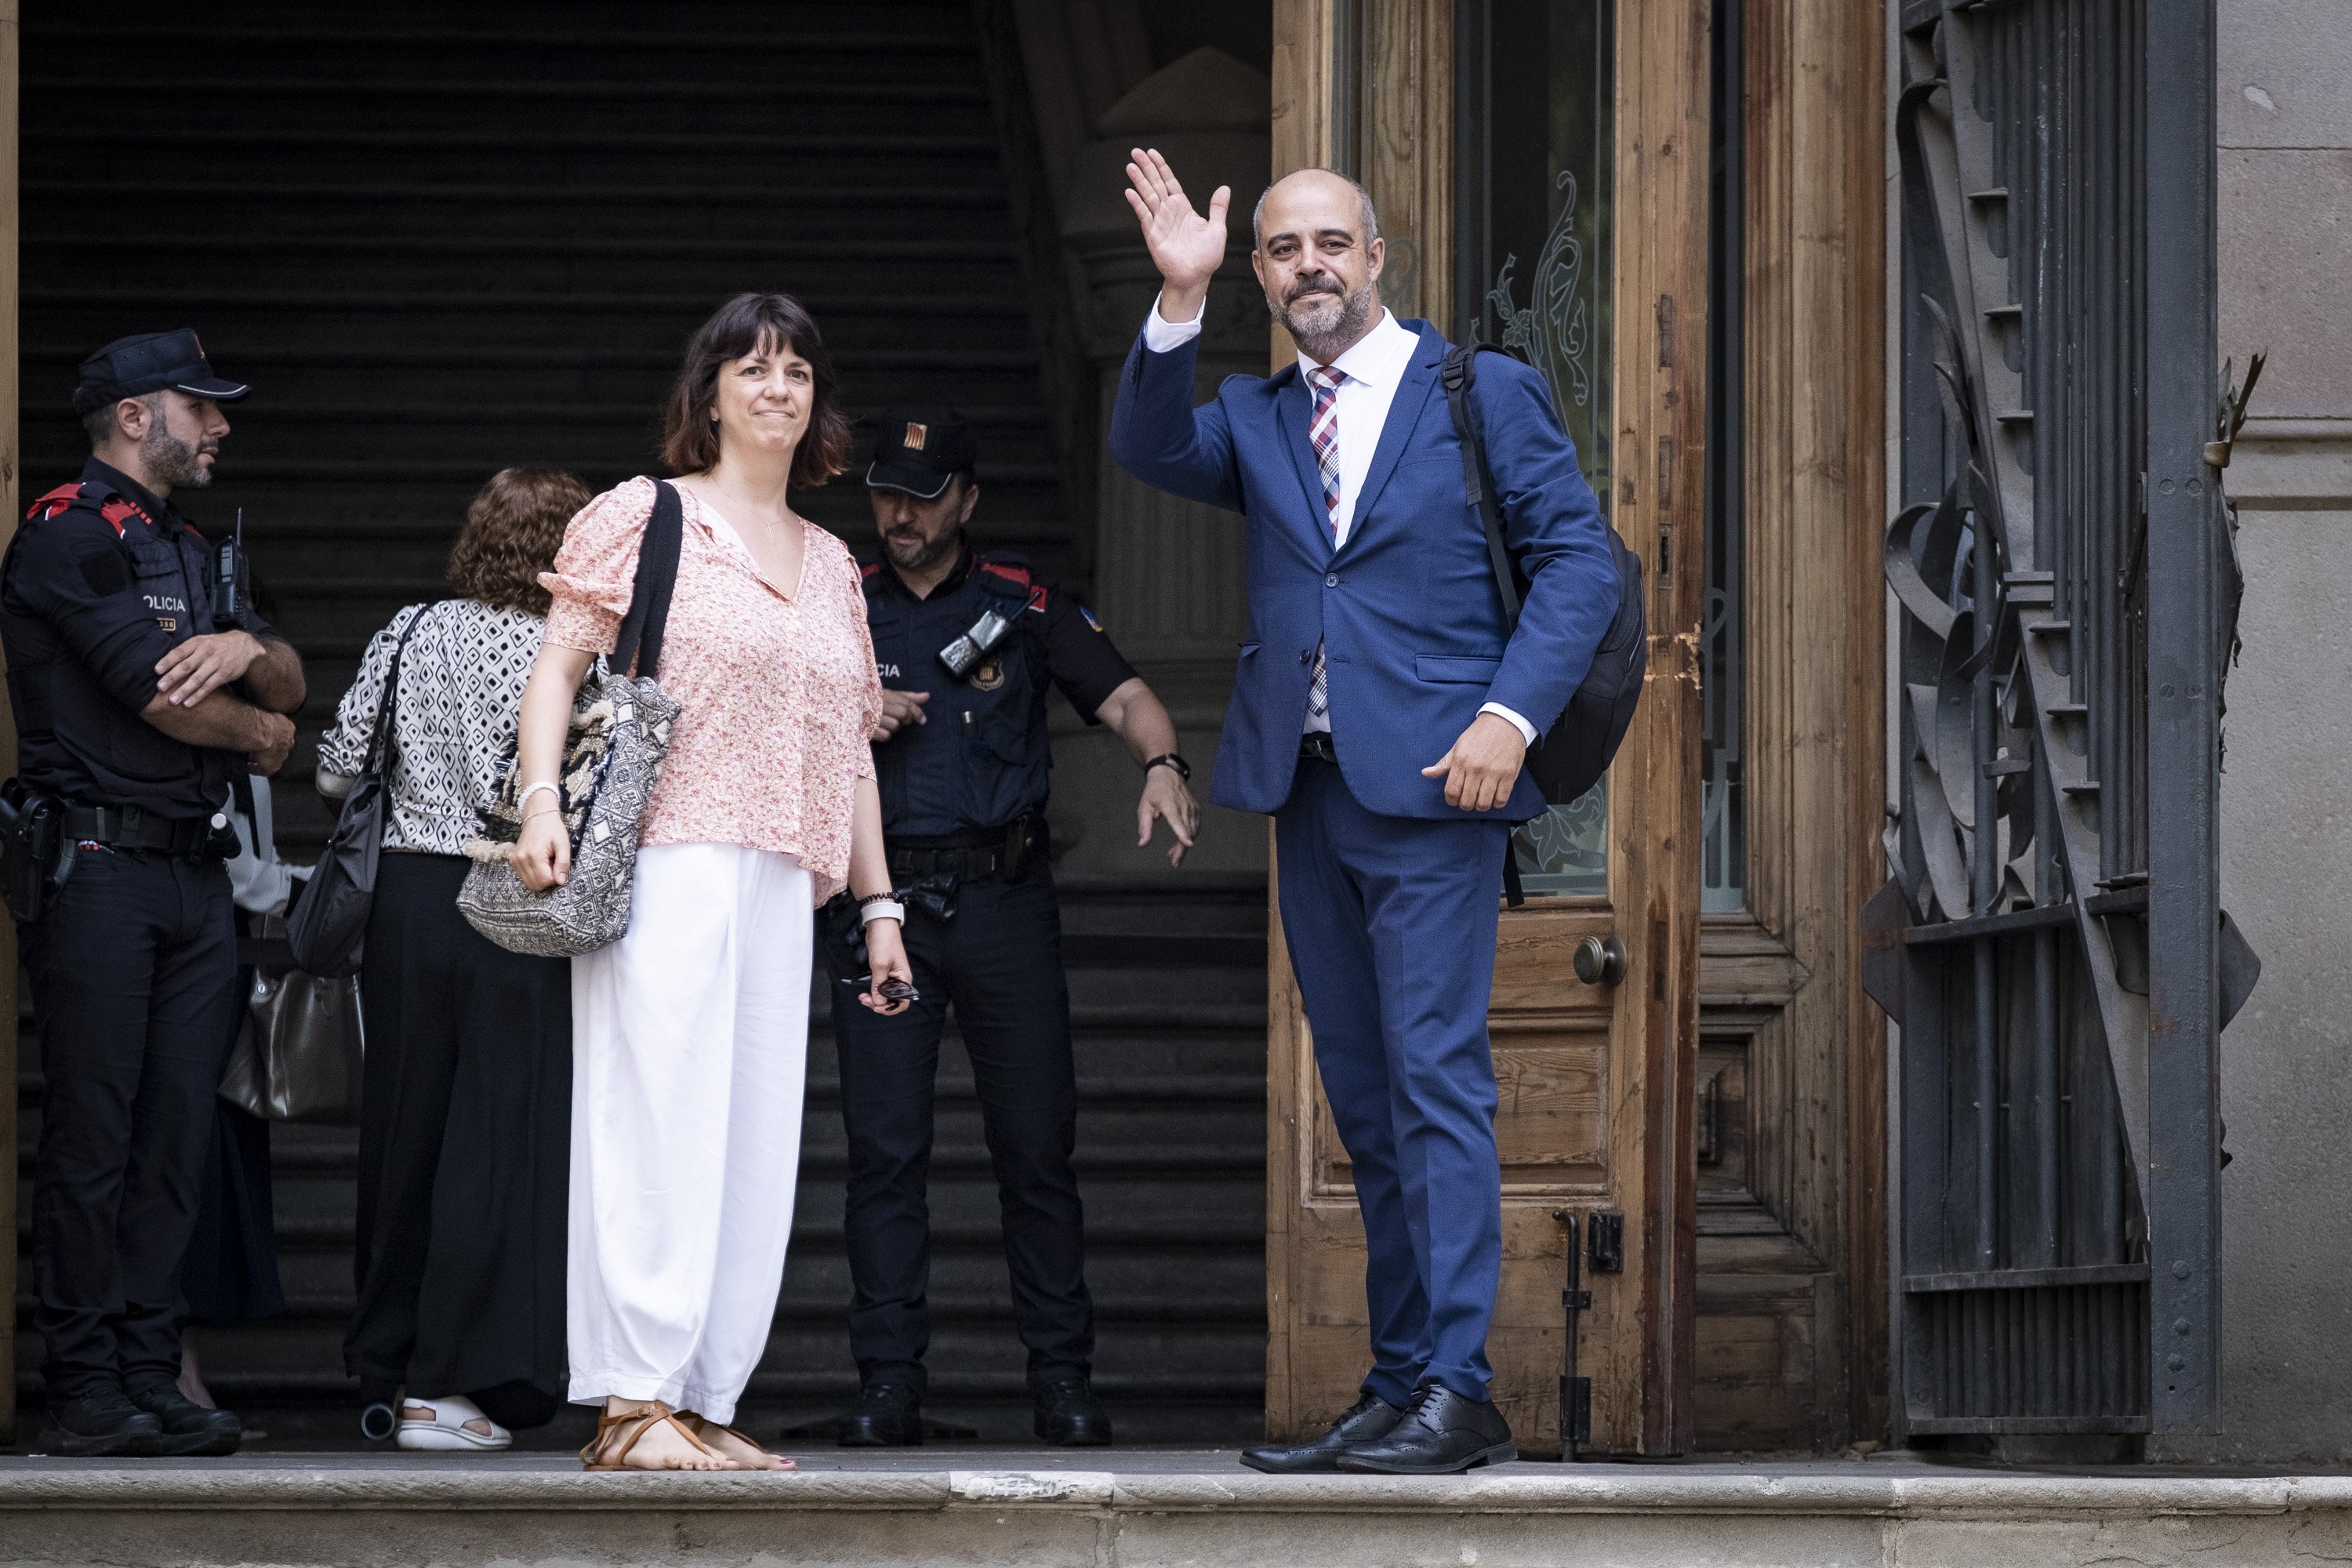 Ex-Catalan minister Miquel Buch convicted to over 4 years' jail in Puigdemont bodyguard case